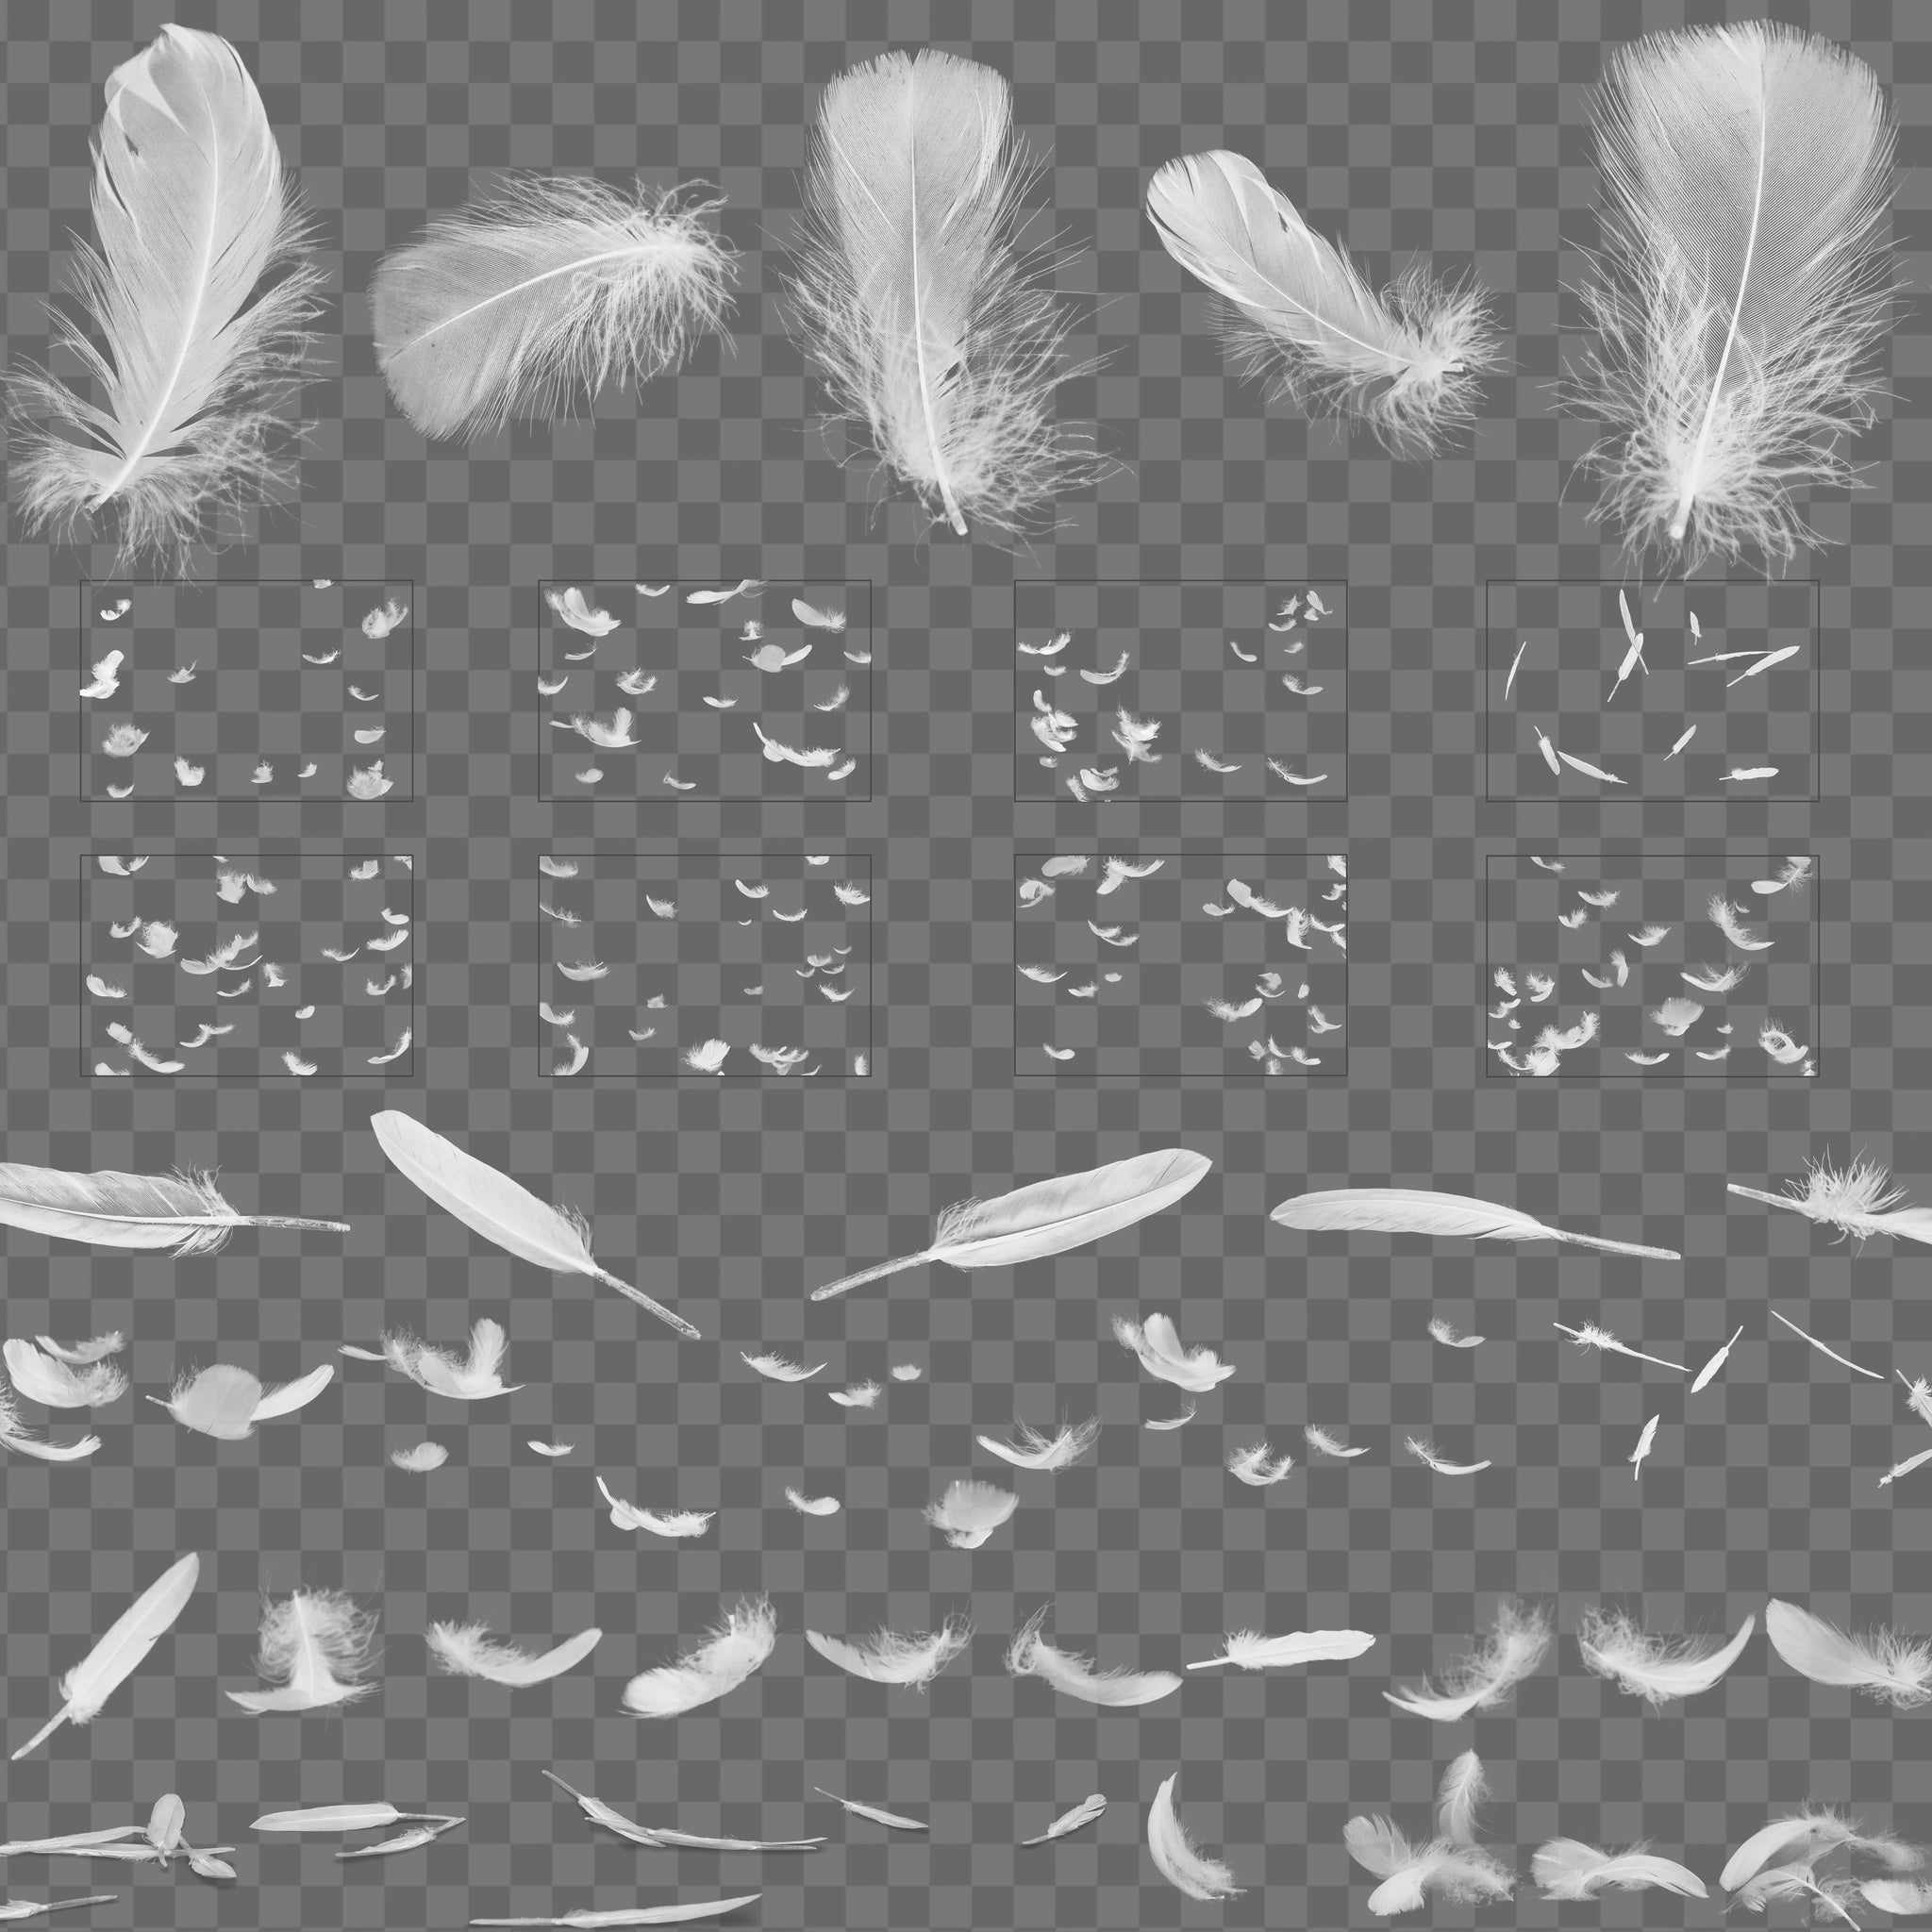 Feather Overlays for Photo Editing